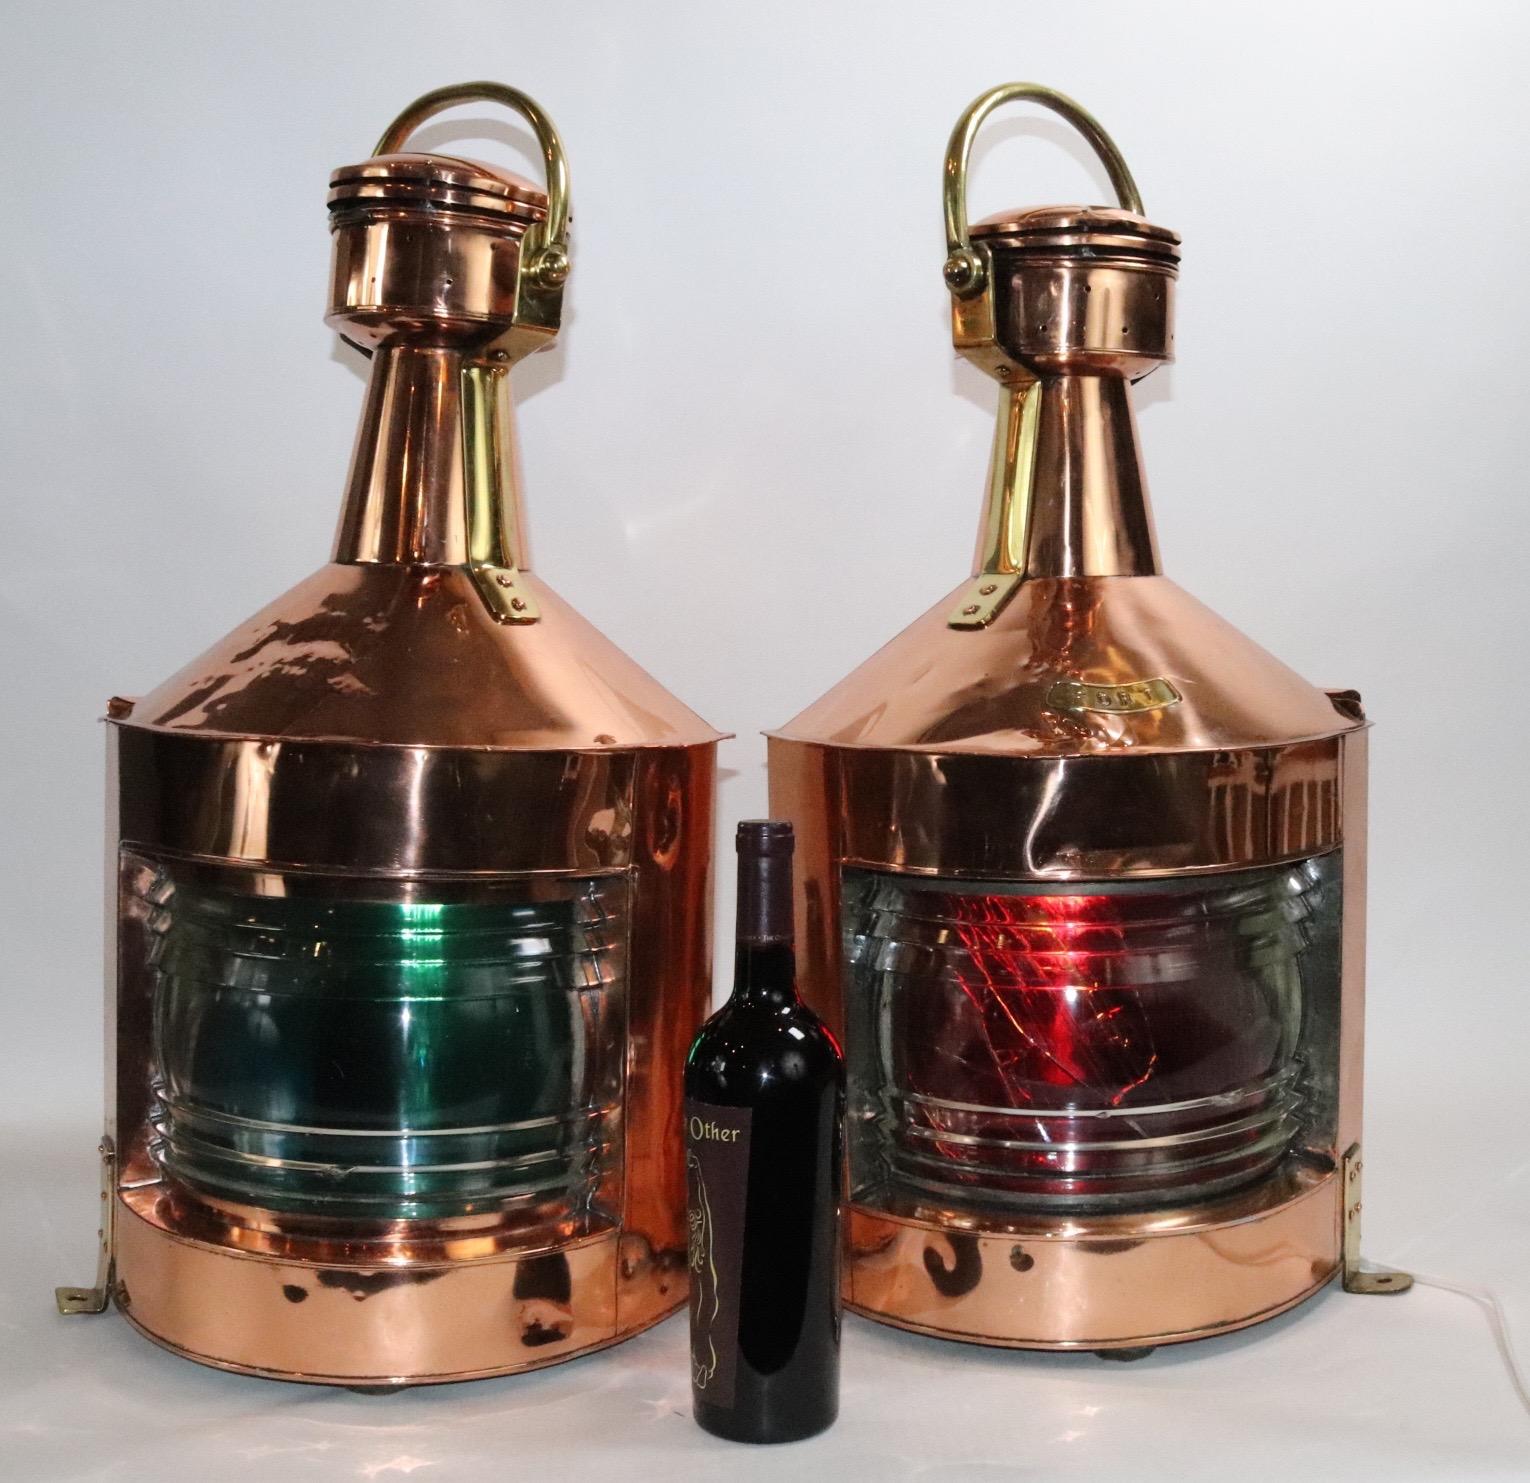 Giant pair of port and starboard ships lanterns by an English maker. With clear Fresnel lenses and colored filters. The red filter is cracked. This is a very large and substantial pair of ships lights. These old relics do have some dents and old